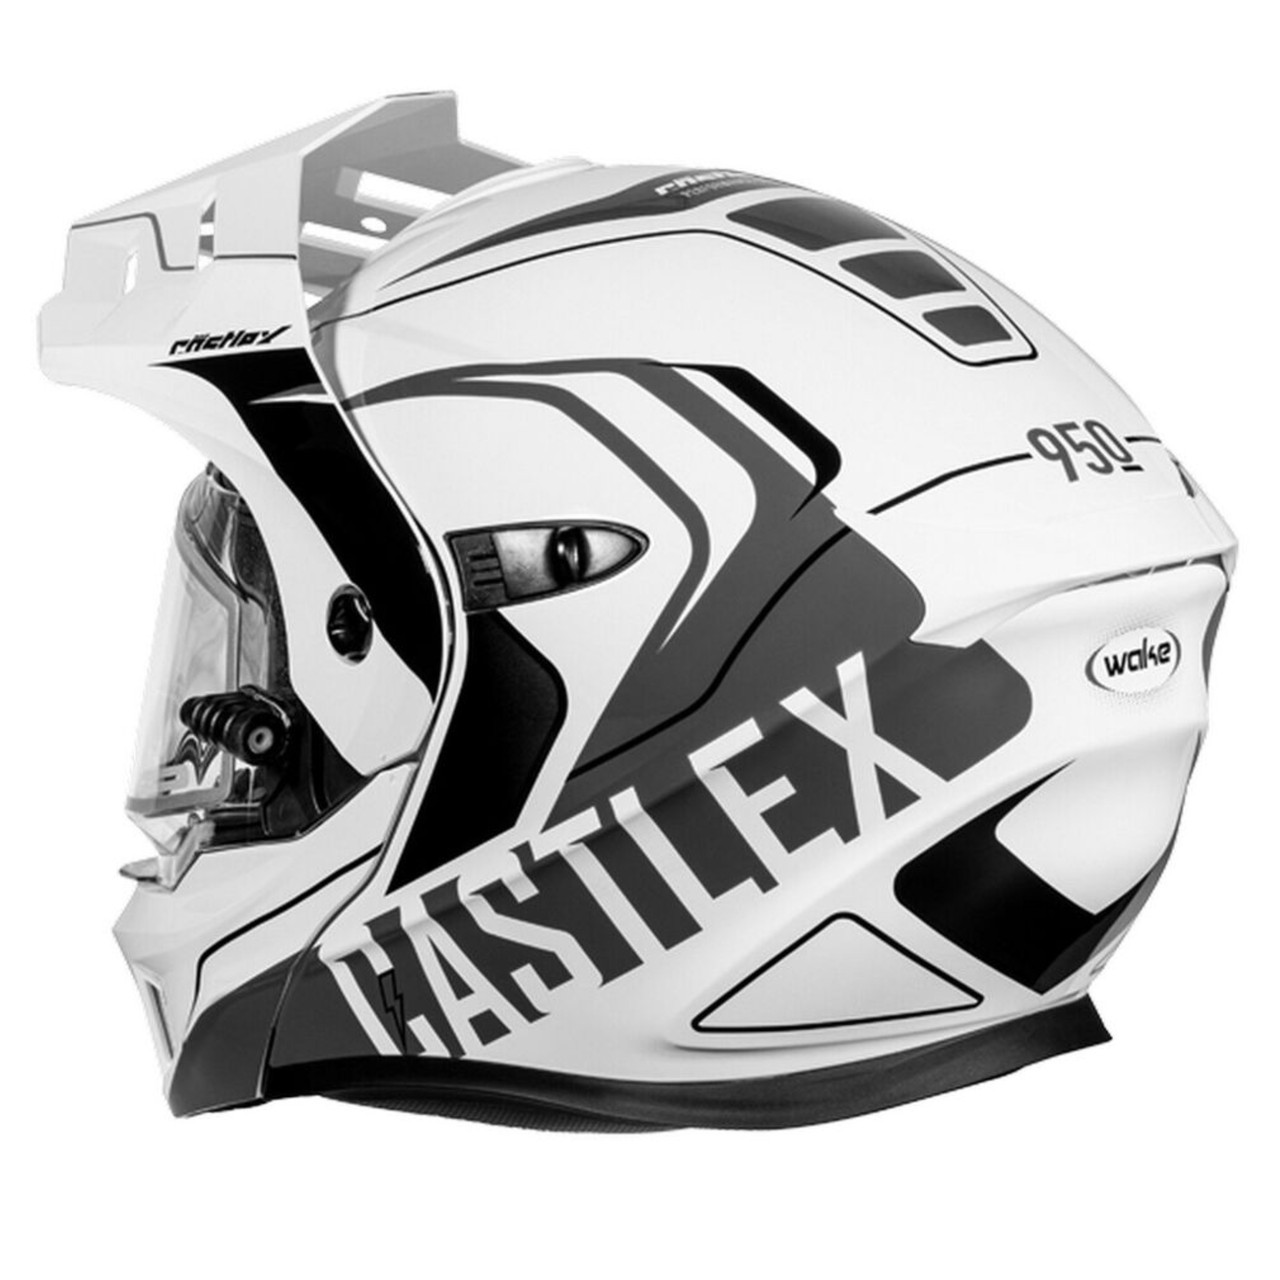 Castle X New Large Matte White/Charcoal CX950V2 Electric Wake Helm, 45-22106